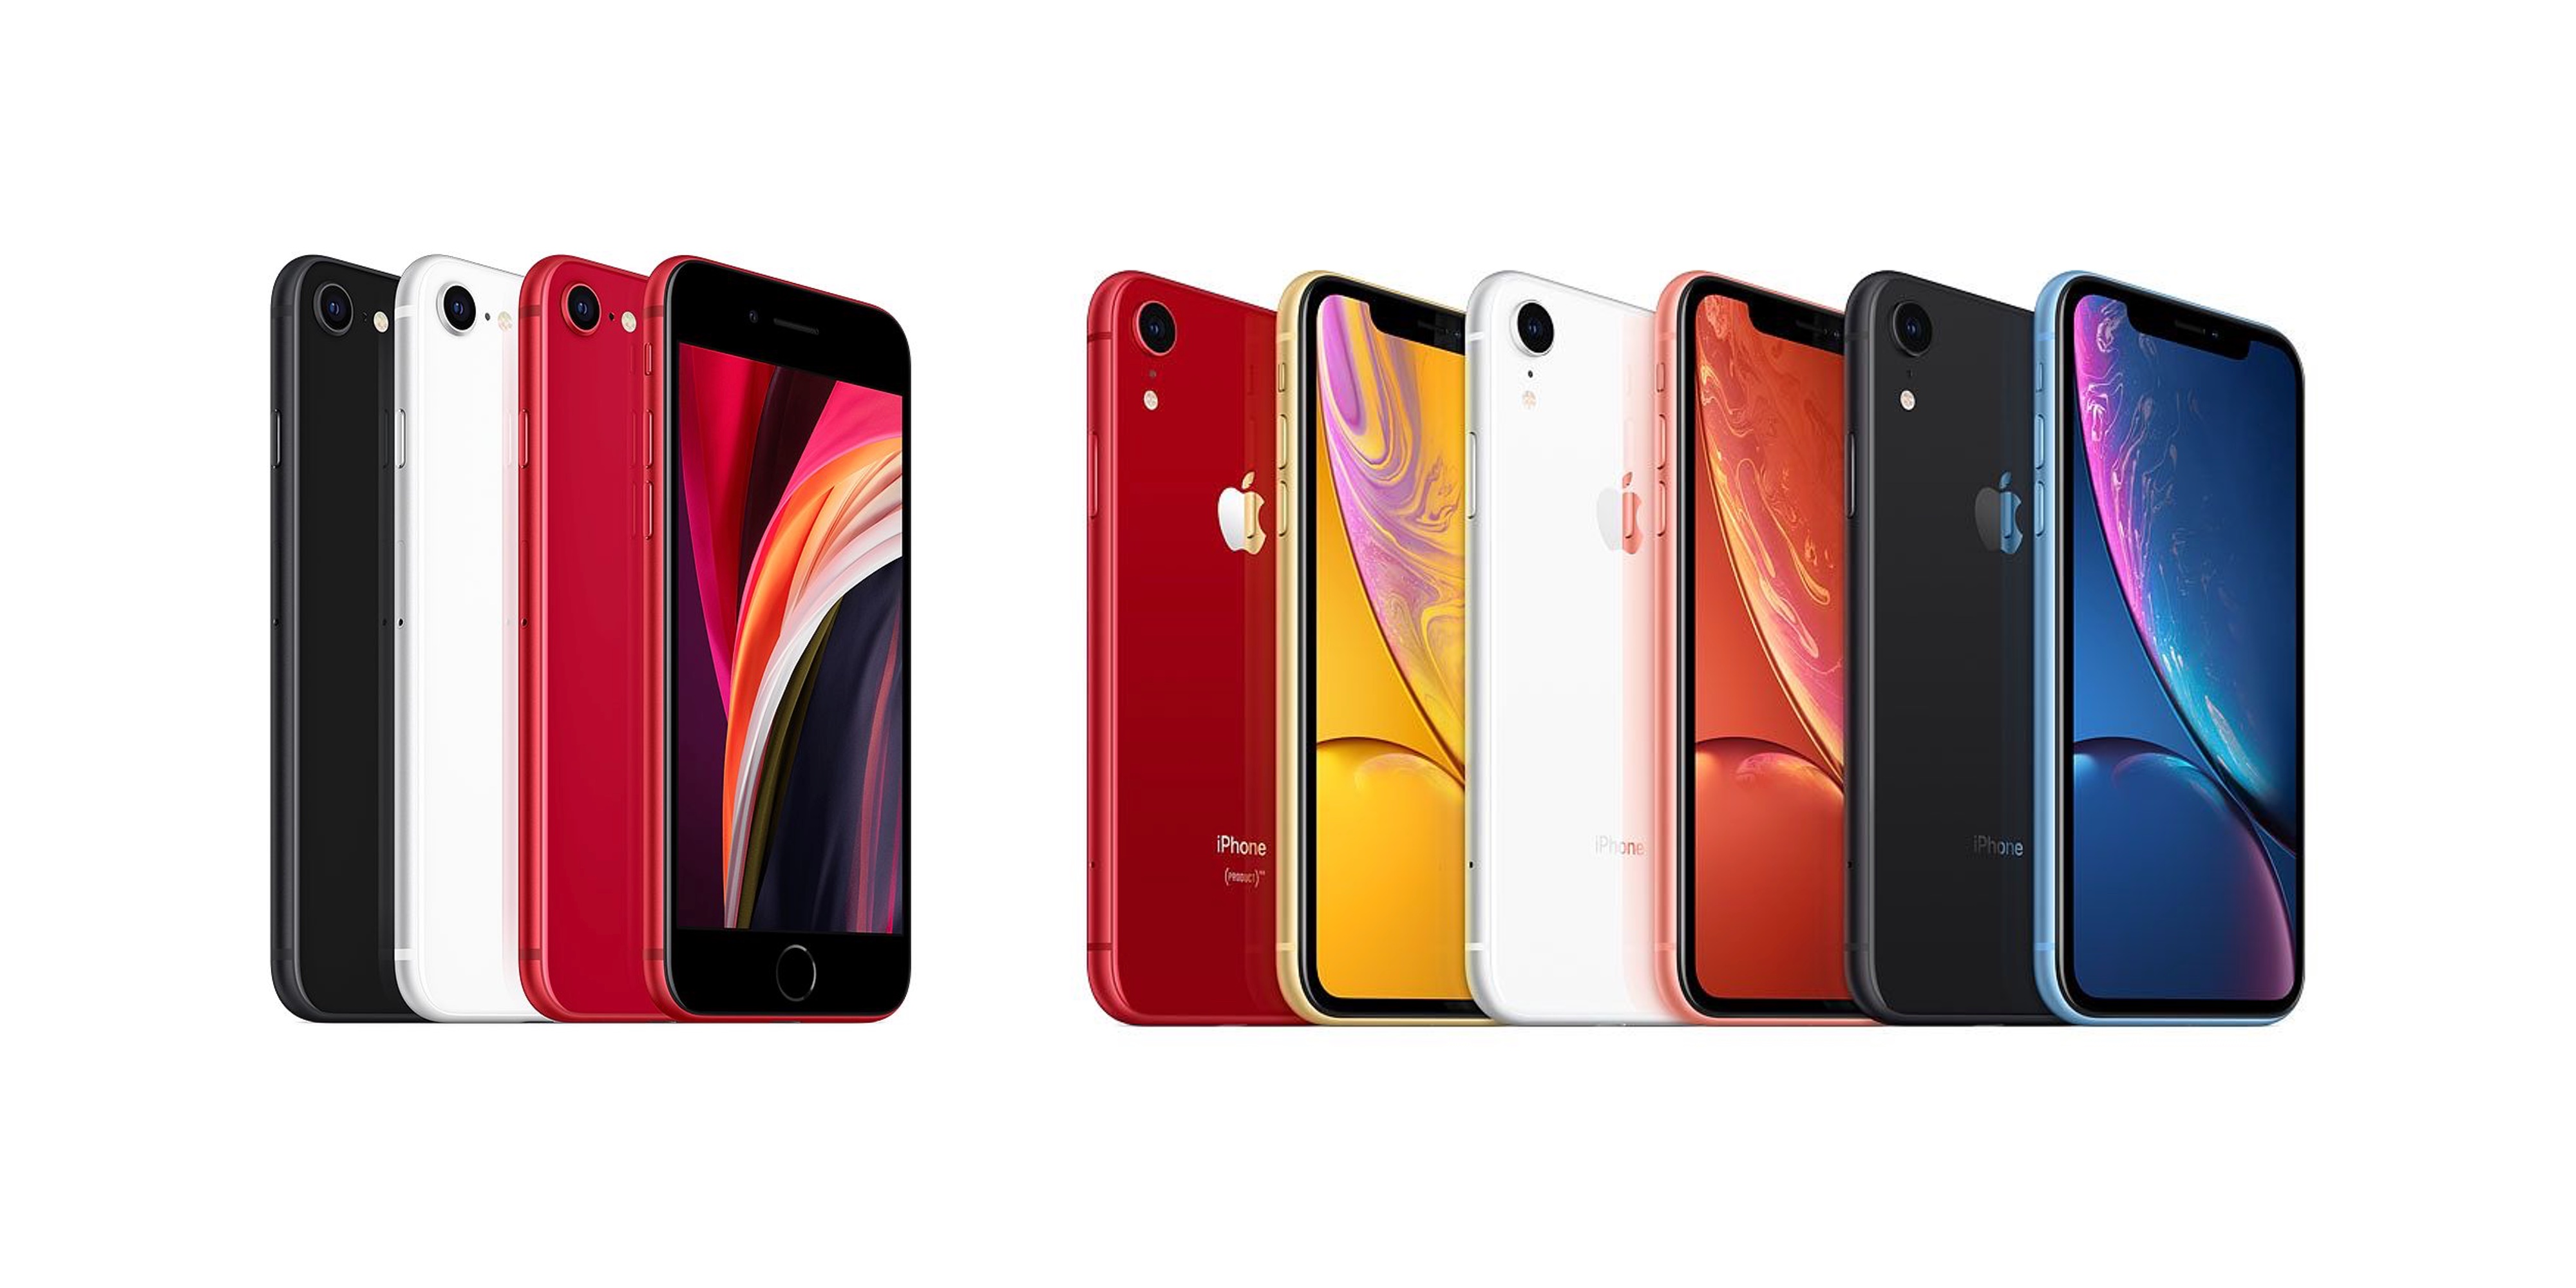 iPhone SE vs iPhone XR comparison Which should you buy? 9to5Mac